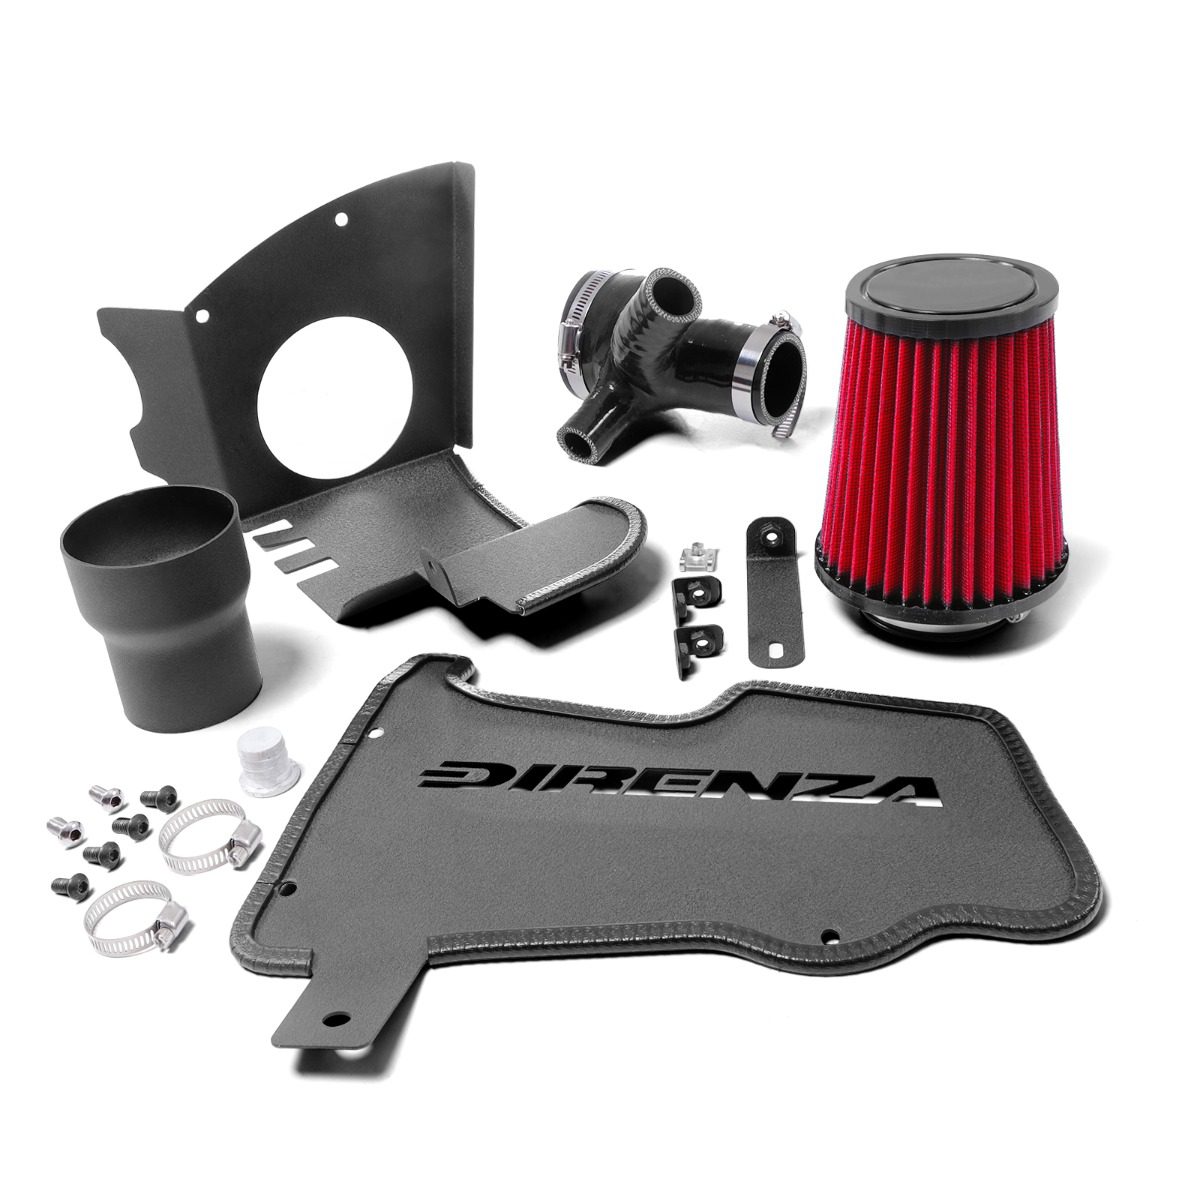 Peugeot 207 GTI 06-14 - Cold Air Induction Kit | Direnza